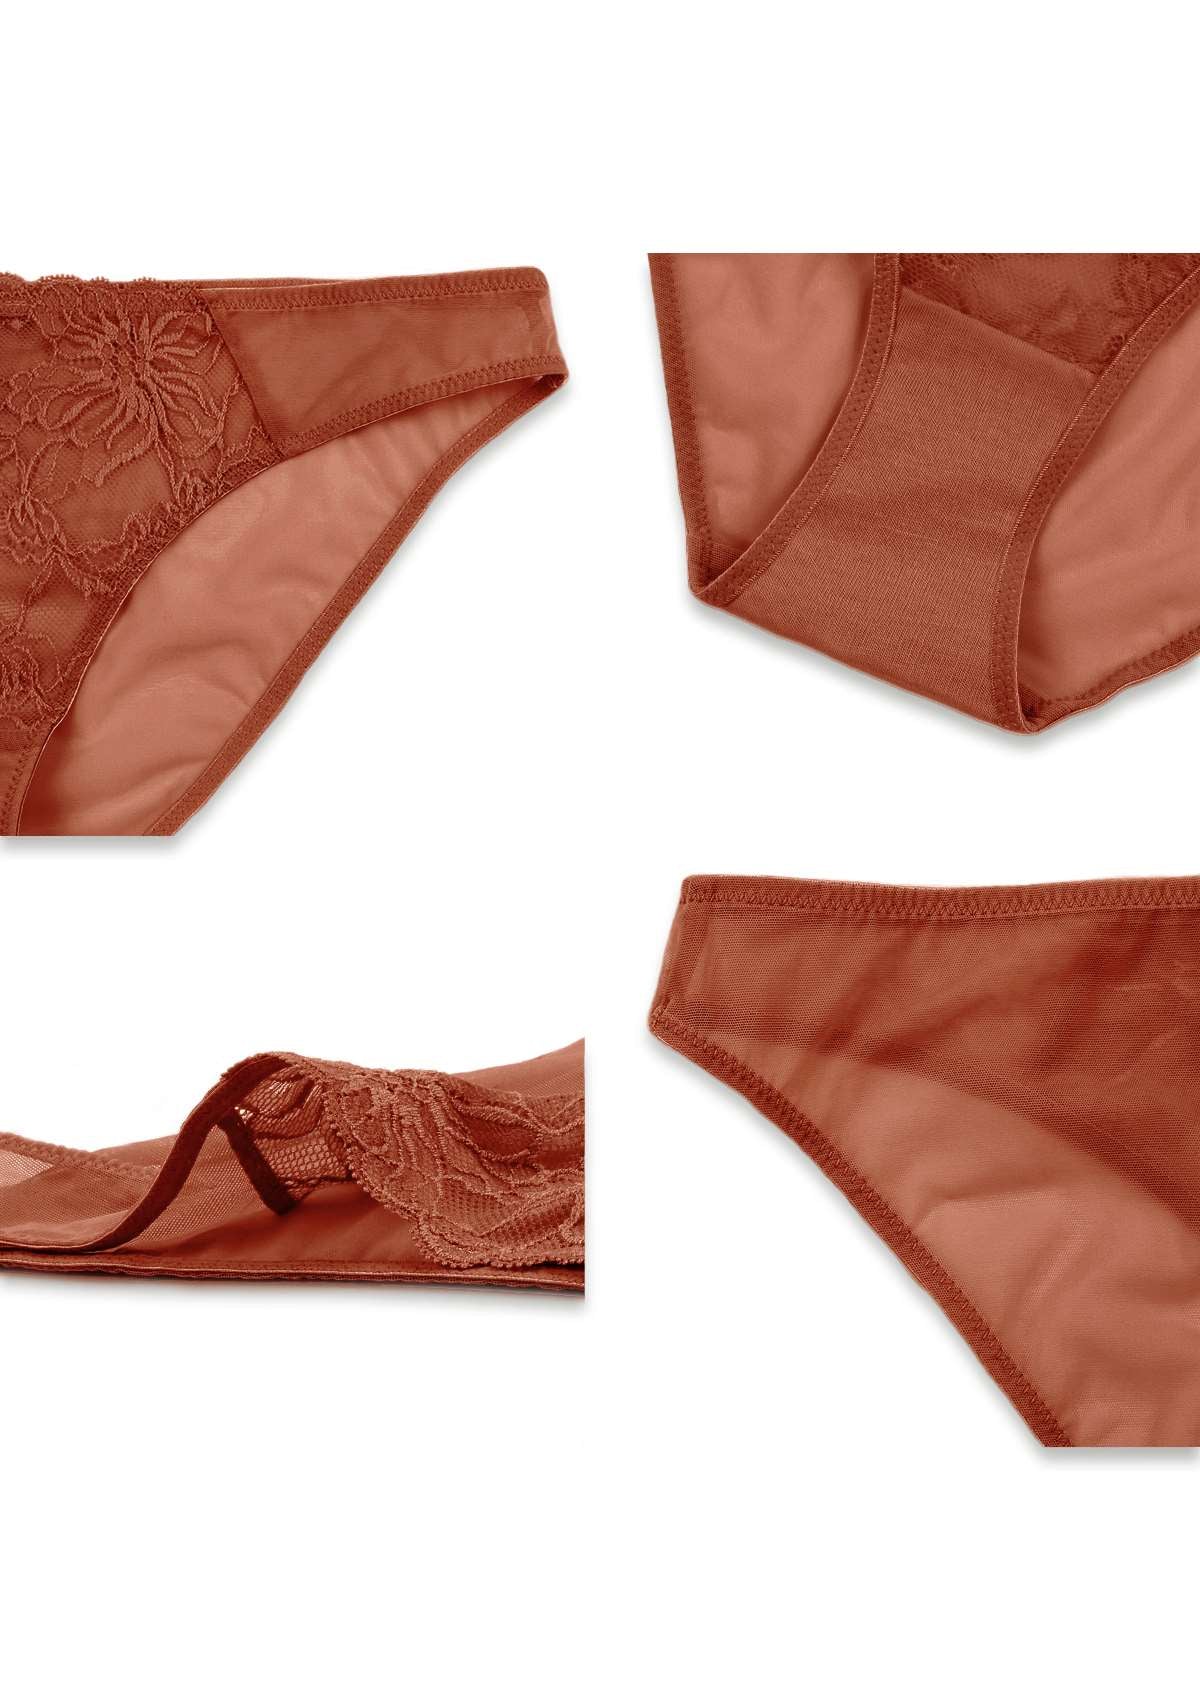 HSIA Mid-Rise Lace And Mesh Panty - Stylish Comfort For Every Day - XXXL / Copper Red